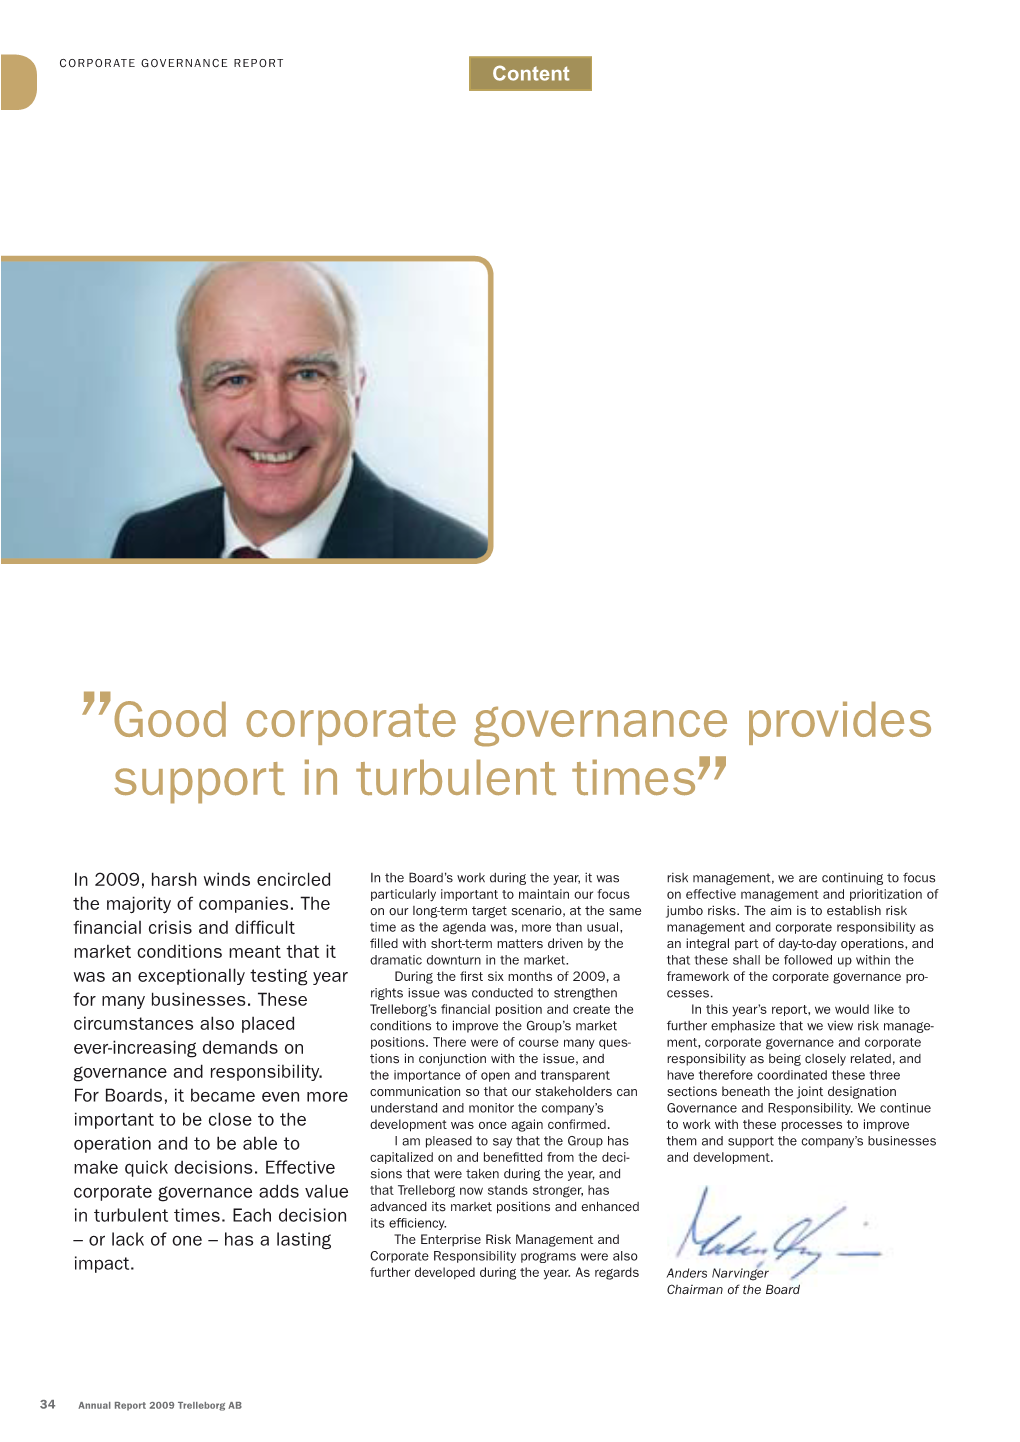 Good Corporate Governance Provides Support in Turbulent Times